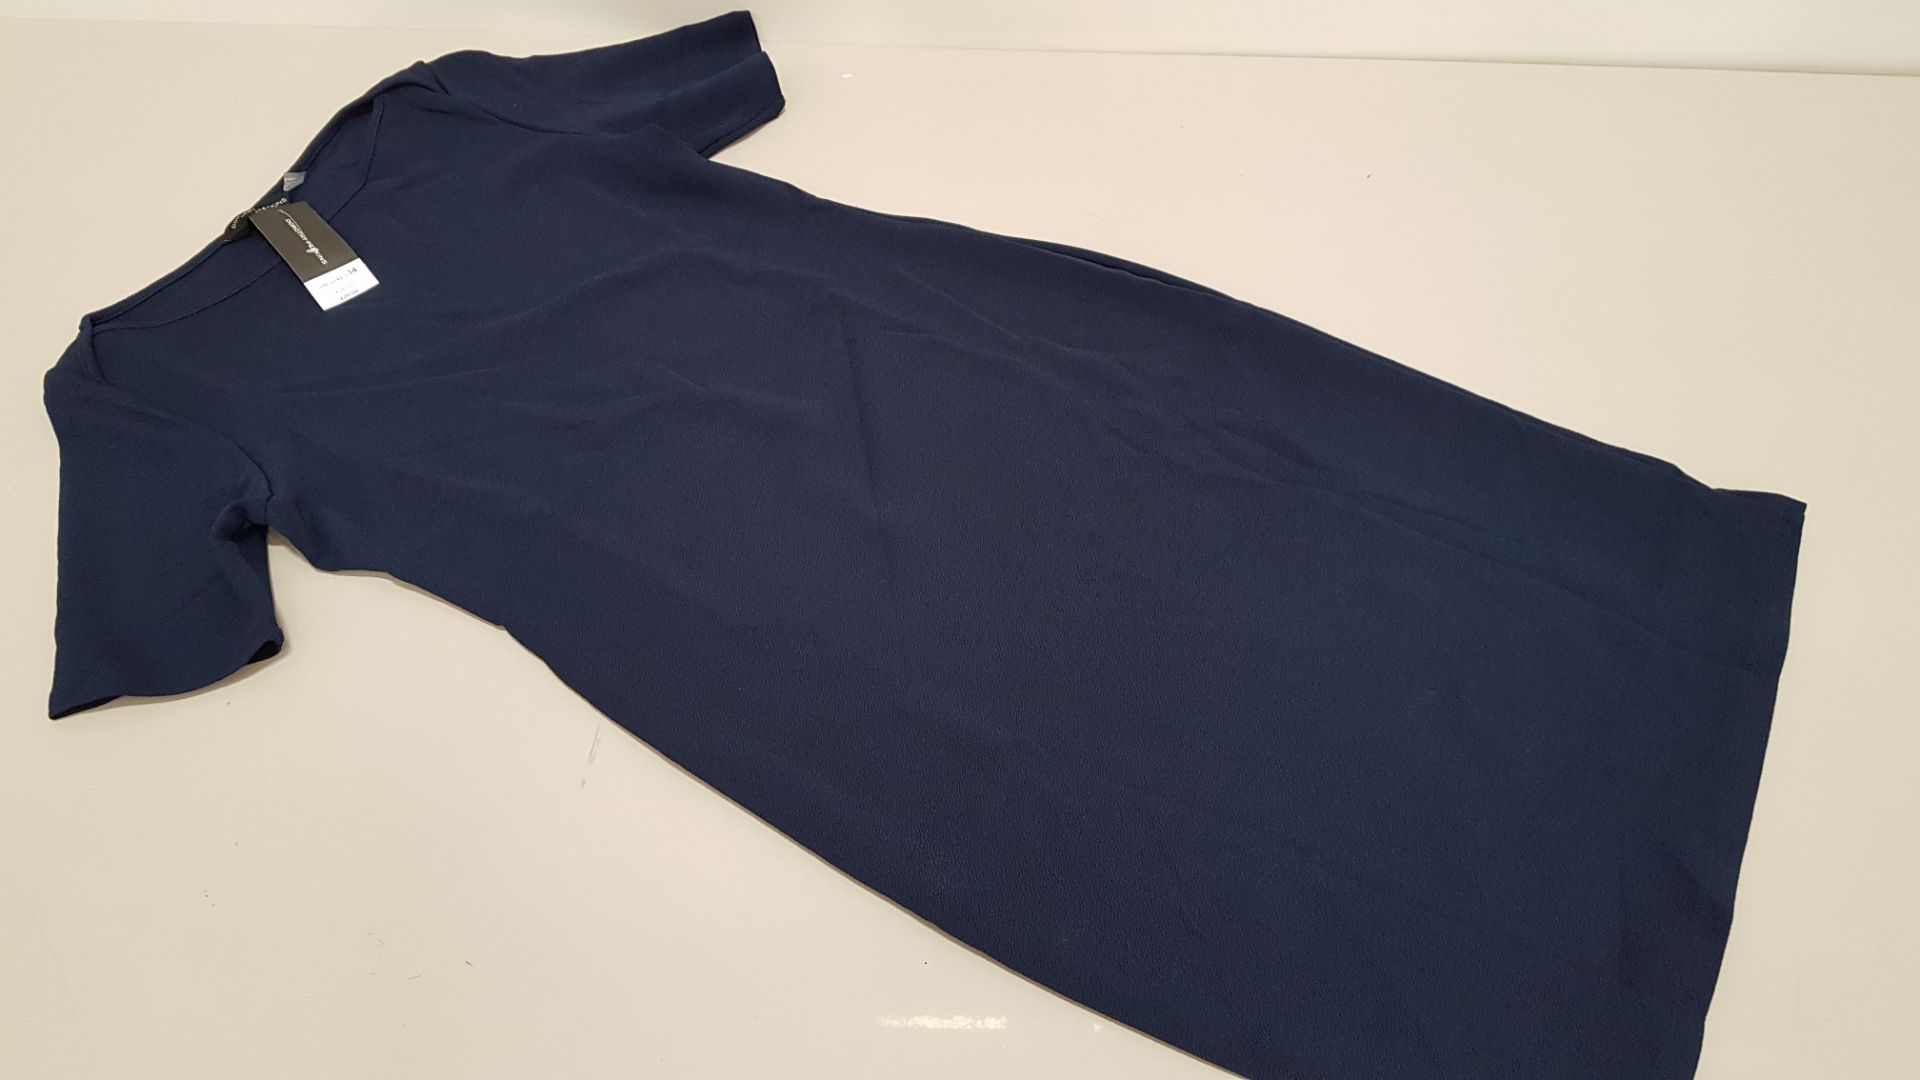 20 X BRAND NEW DOROTHY PERKINS NAVY DRESSES UK SIZE 14 RRP £20.00 (TOTAL RRP £400.00)